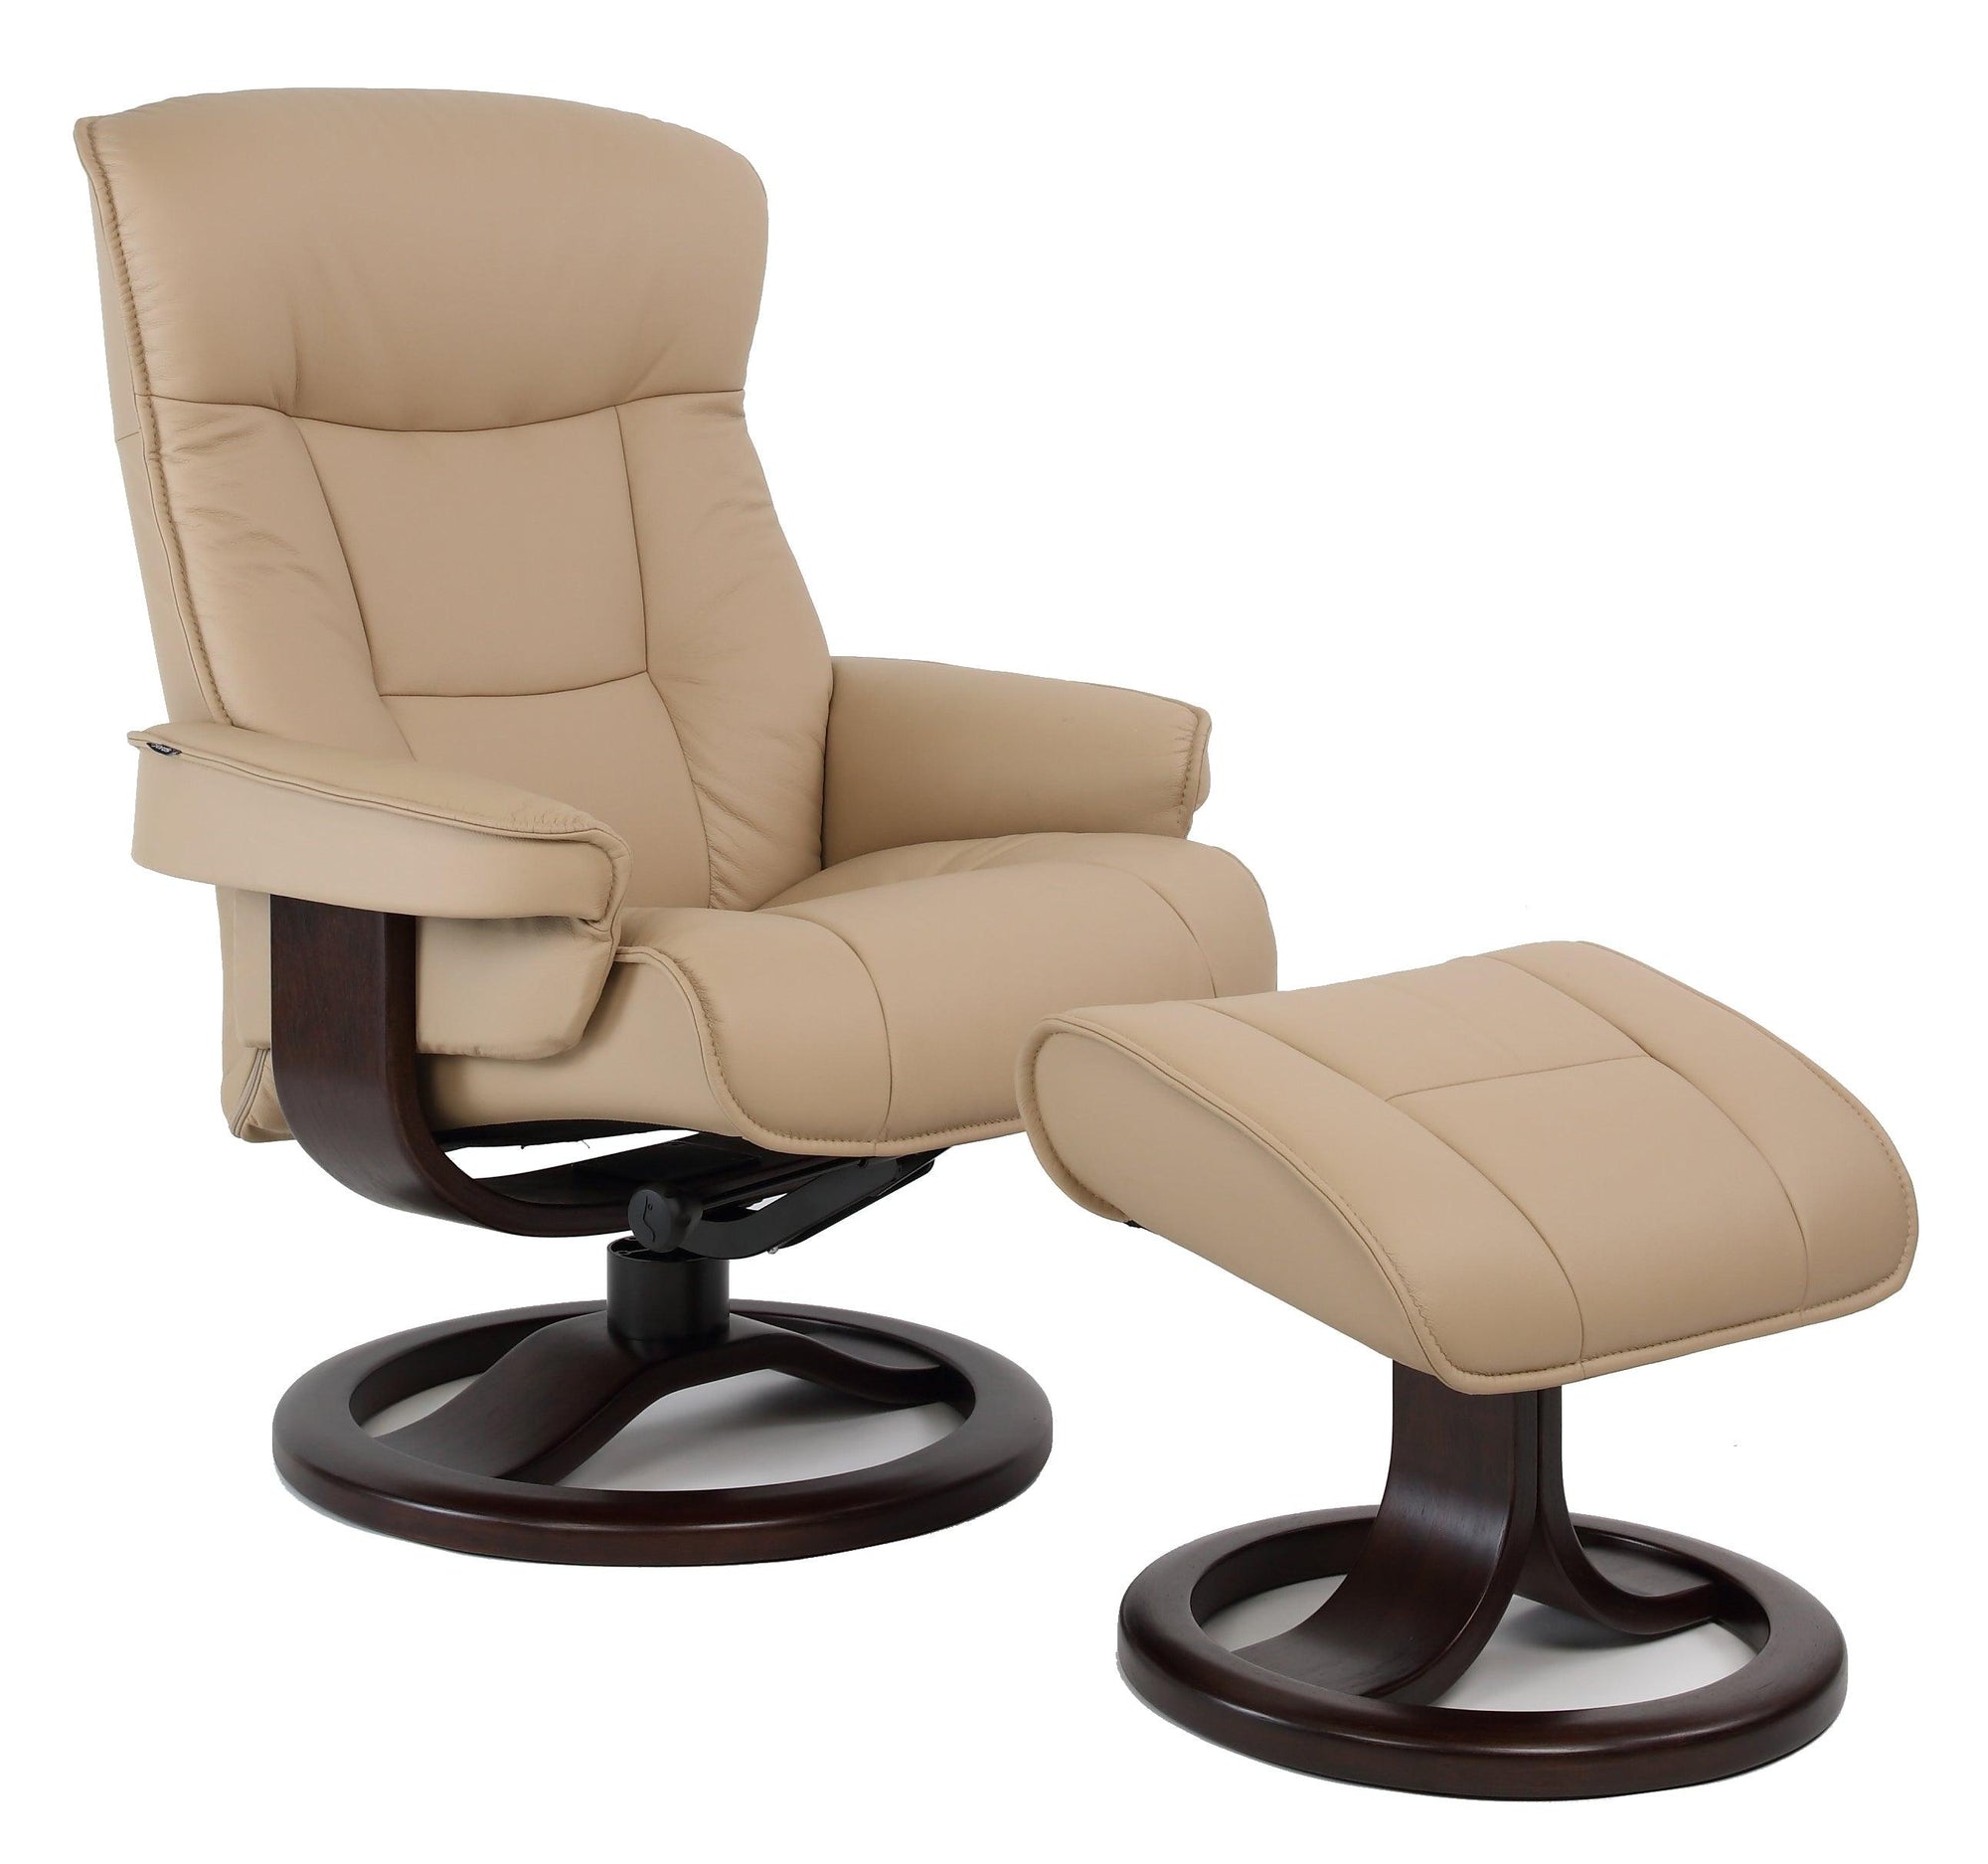 Furniture Mustang R - Reclining Living Chair Leather Euro